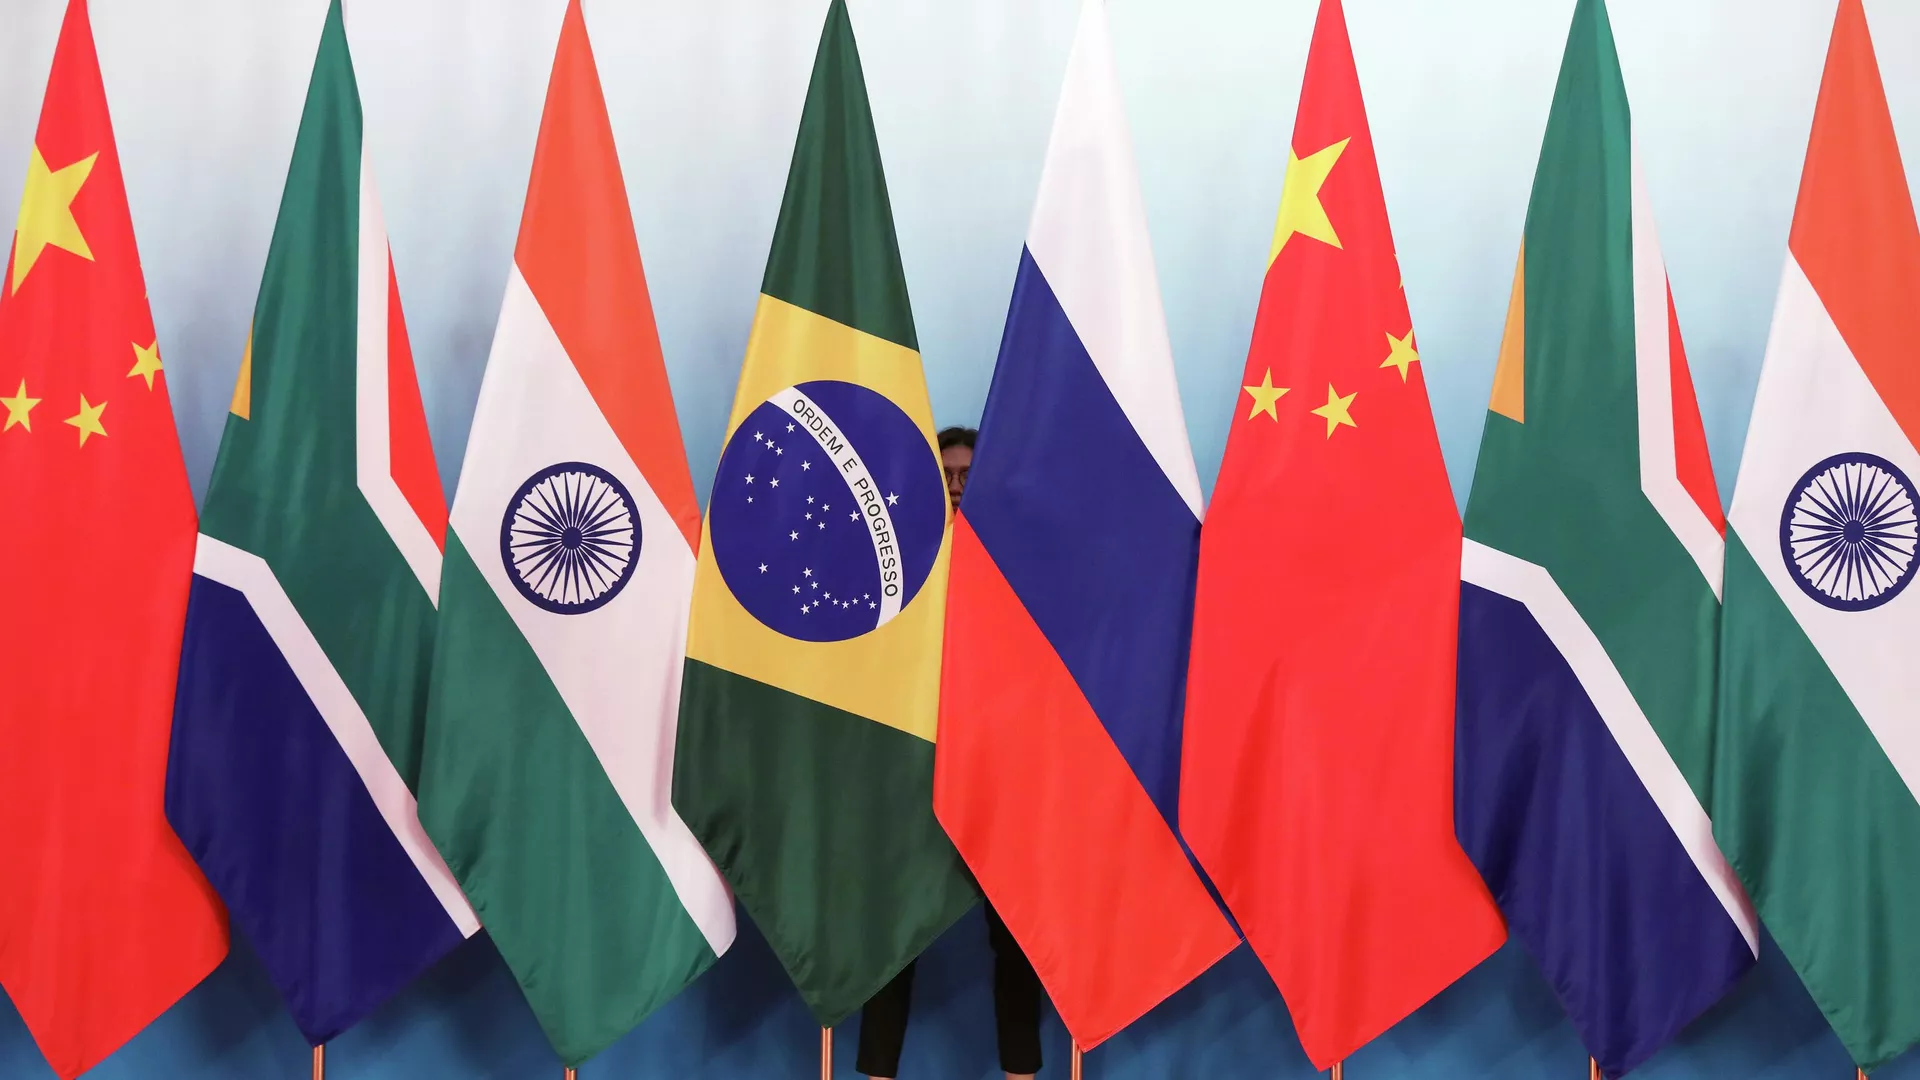 Staff worker stands behind national flags of Brazil, Russia, China, South Africa and India to tidy the flags ahead of a group photo during the BRICS Summit at the Xiamen International Conference and Exhibition Center in Xiamen, southeastern China's Fujian Province, Monday, Sept. 4, 2017. - Sputnik International, 1920, 11.04.2023